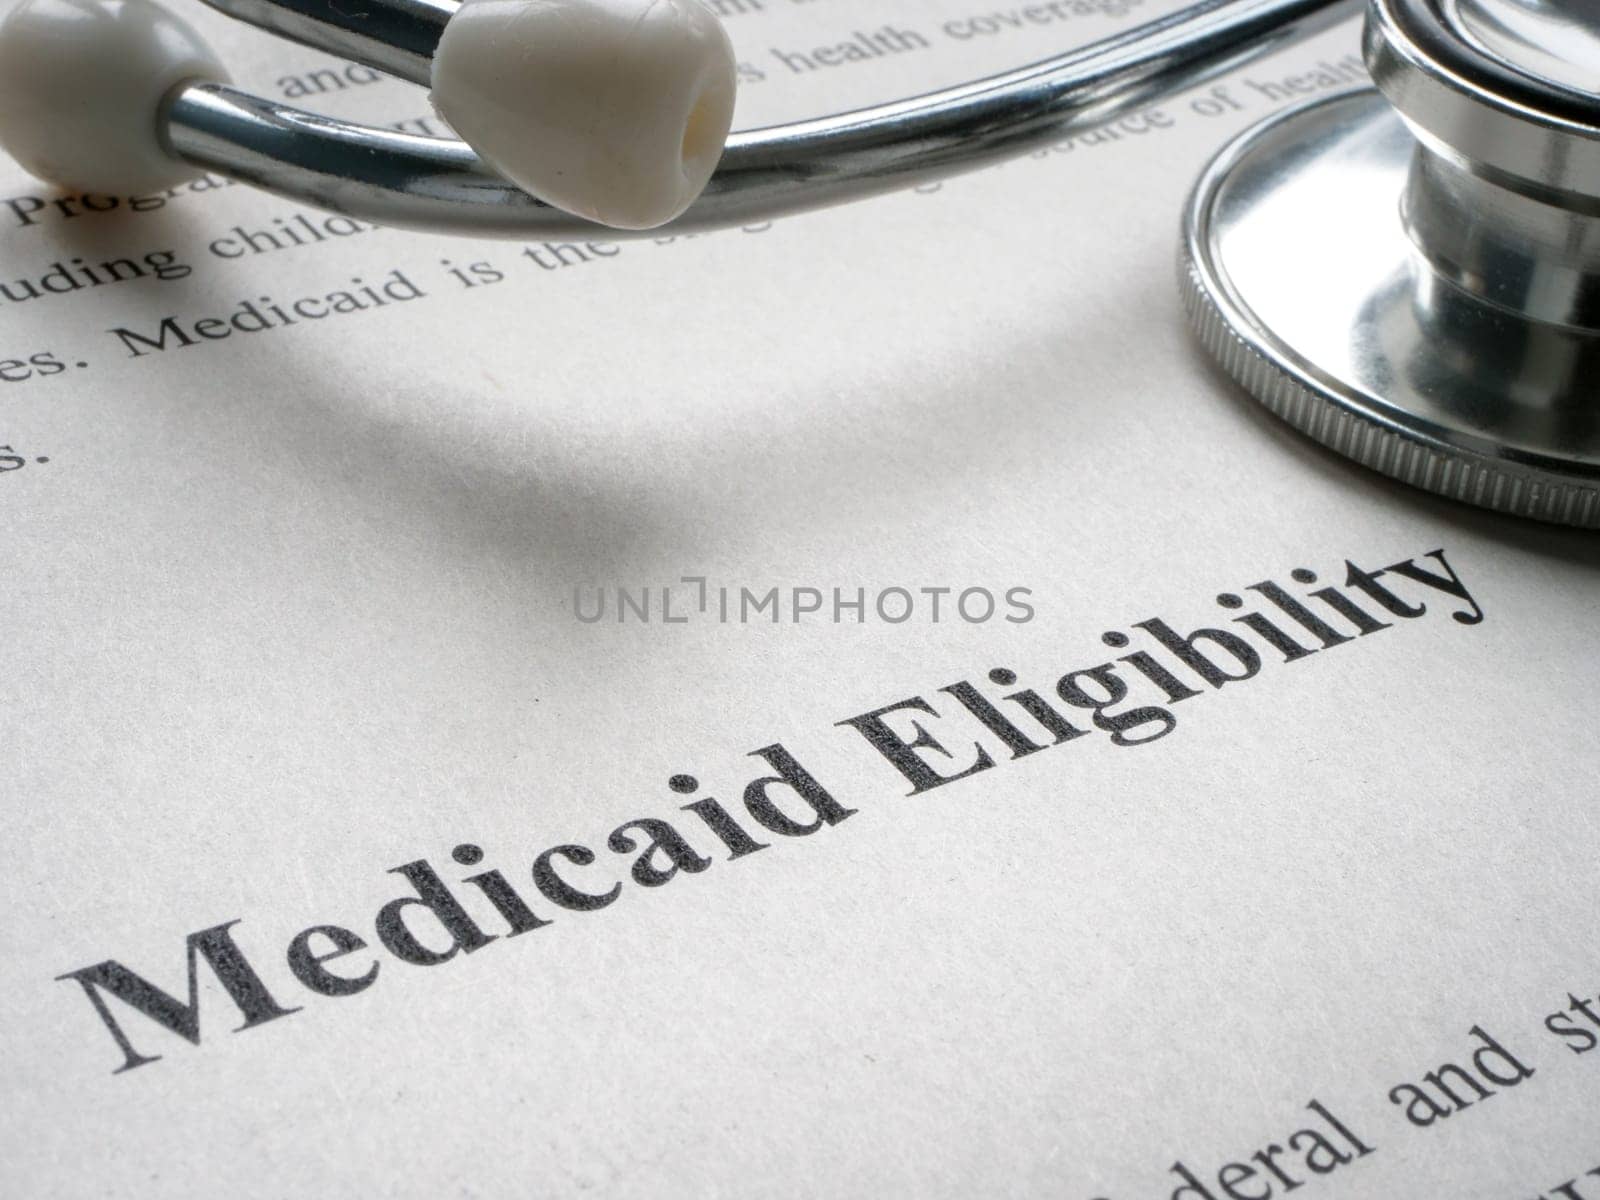 Info about Medicaid eligibility and medical stethoscope. by designer491